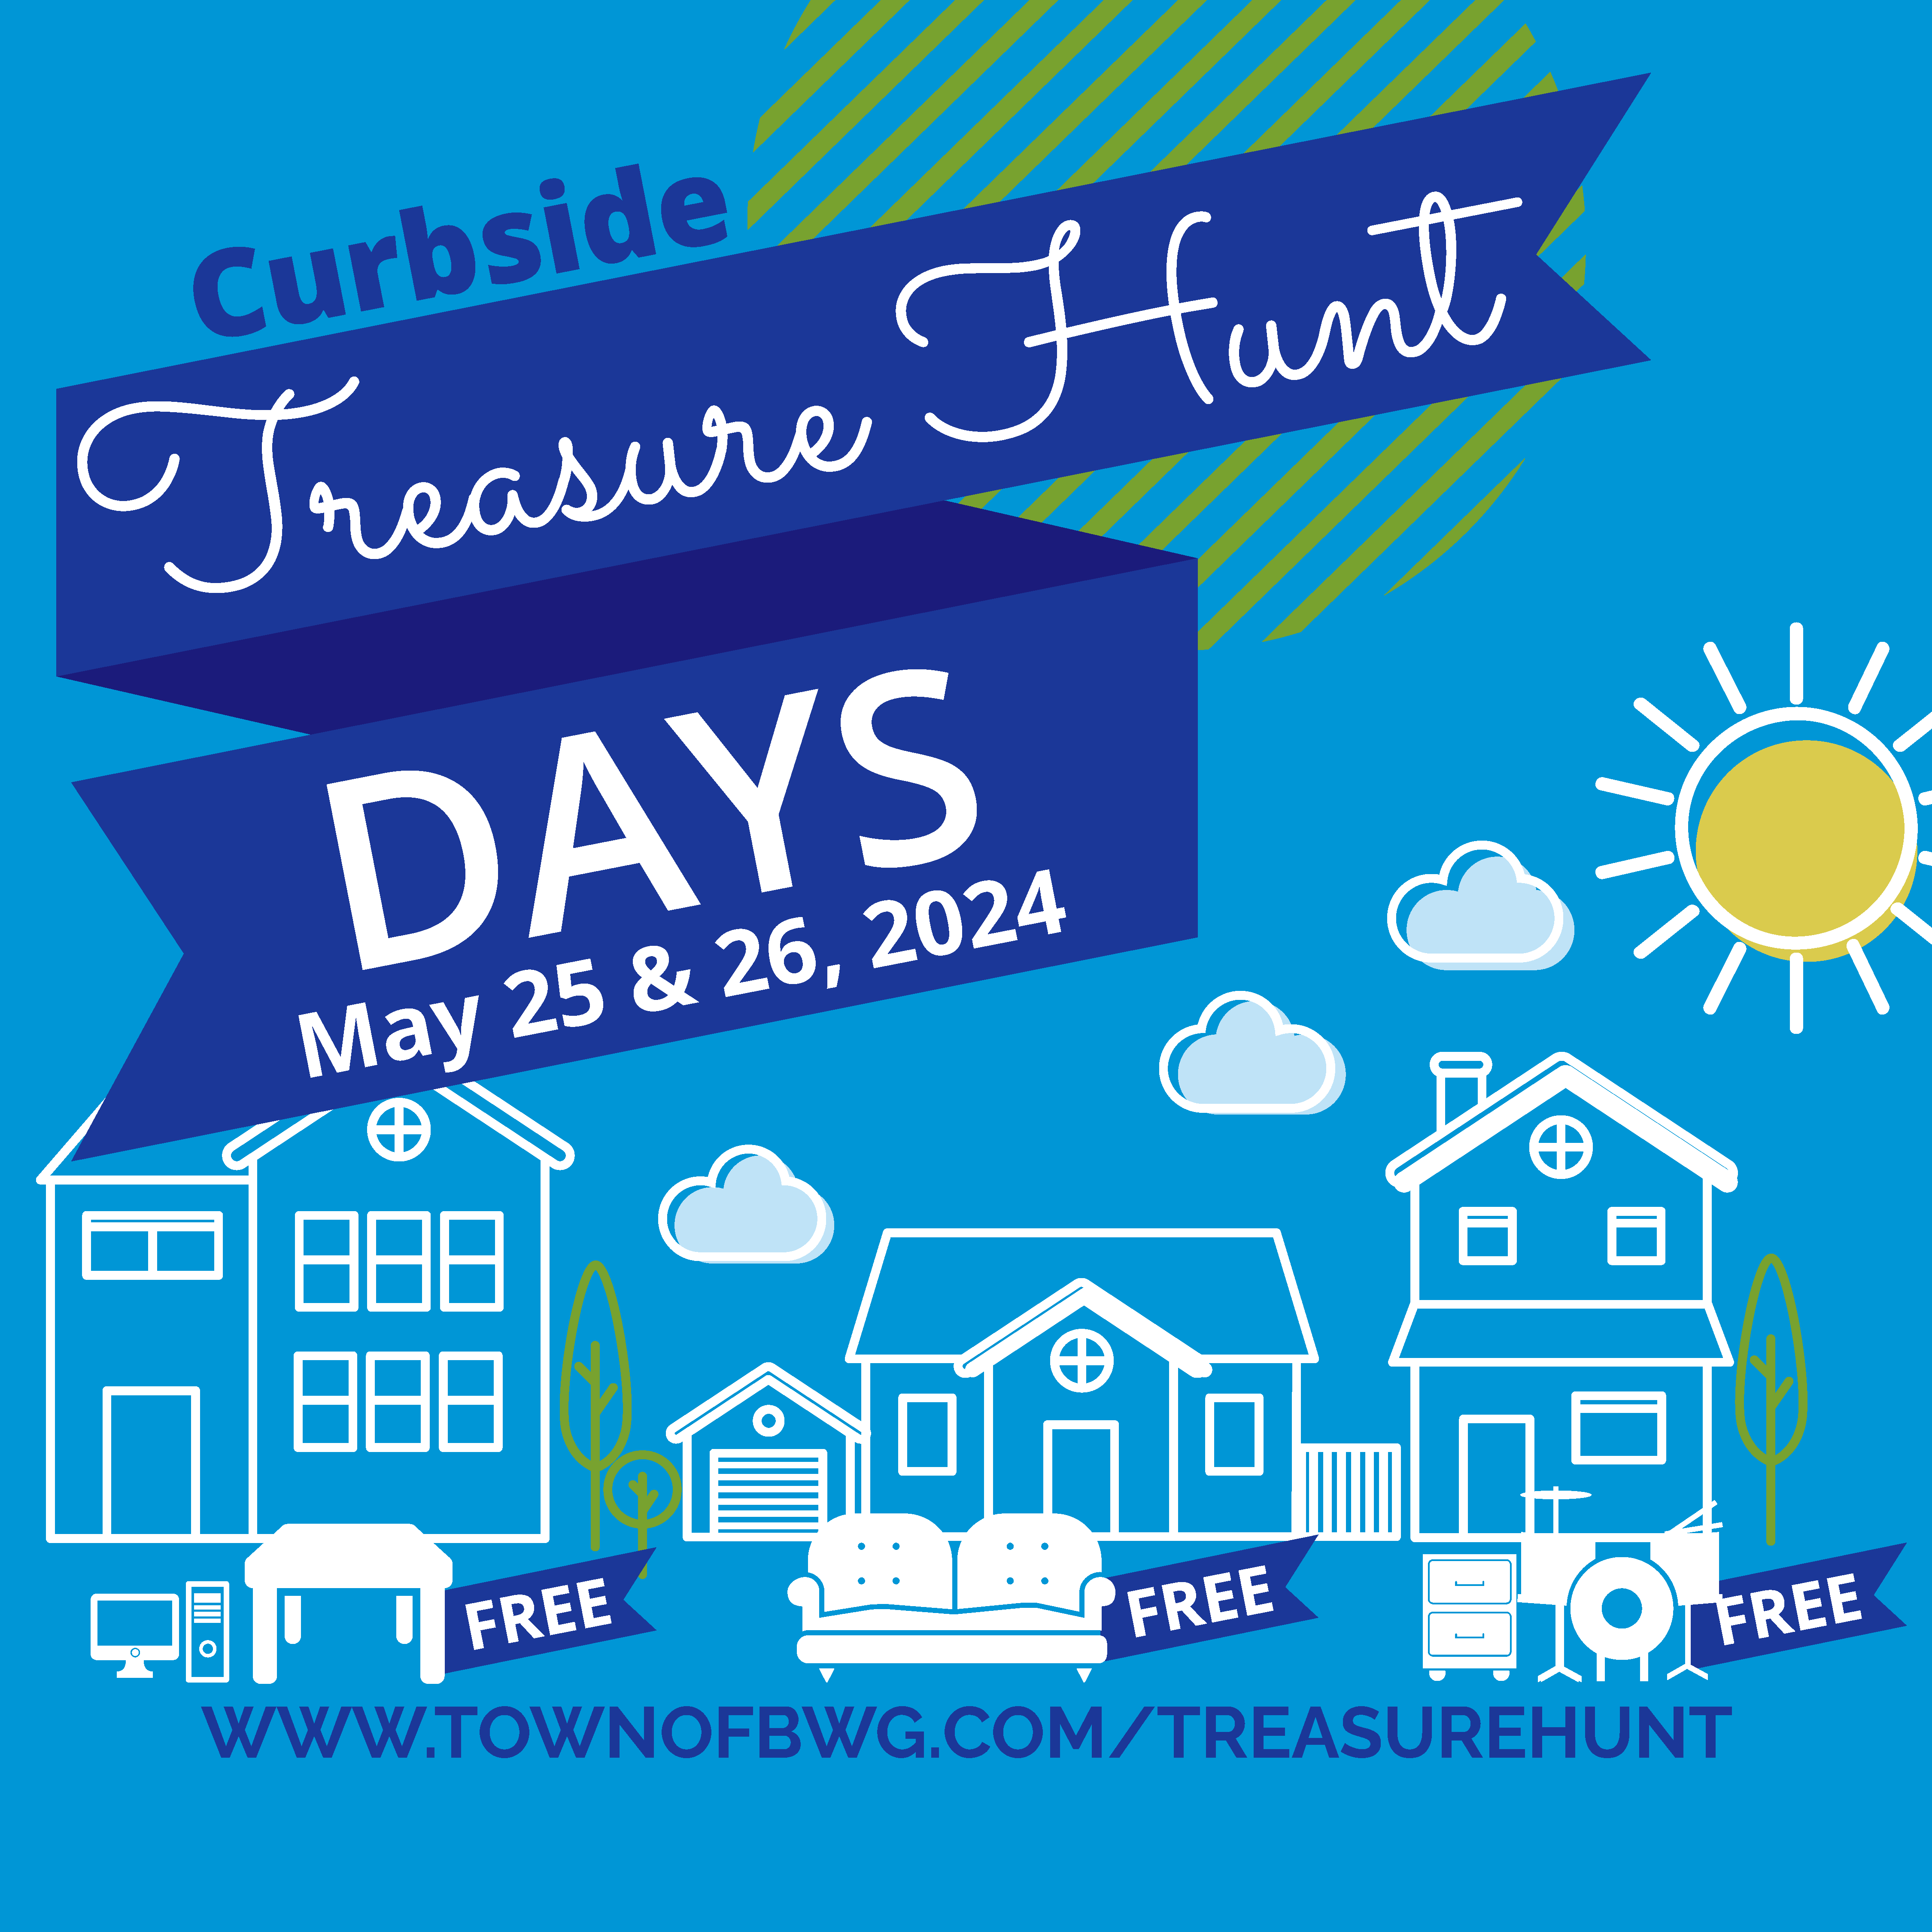 Curbside Treasure Hunt Days event banner, reading 